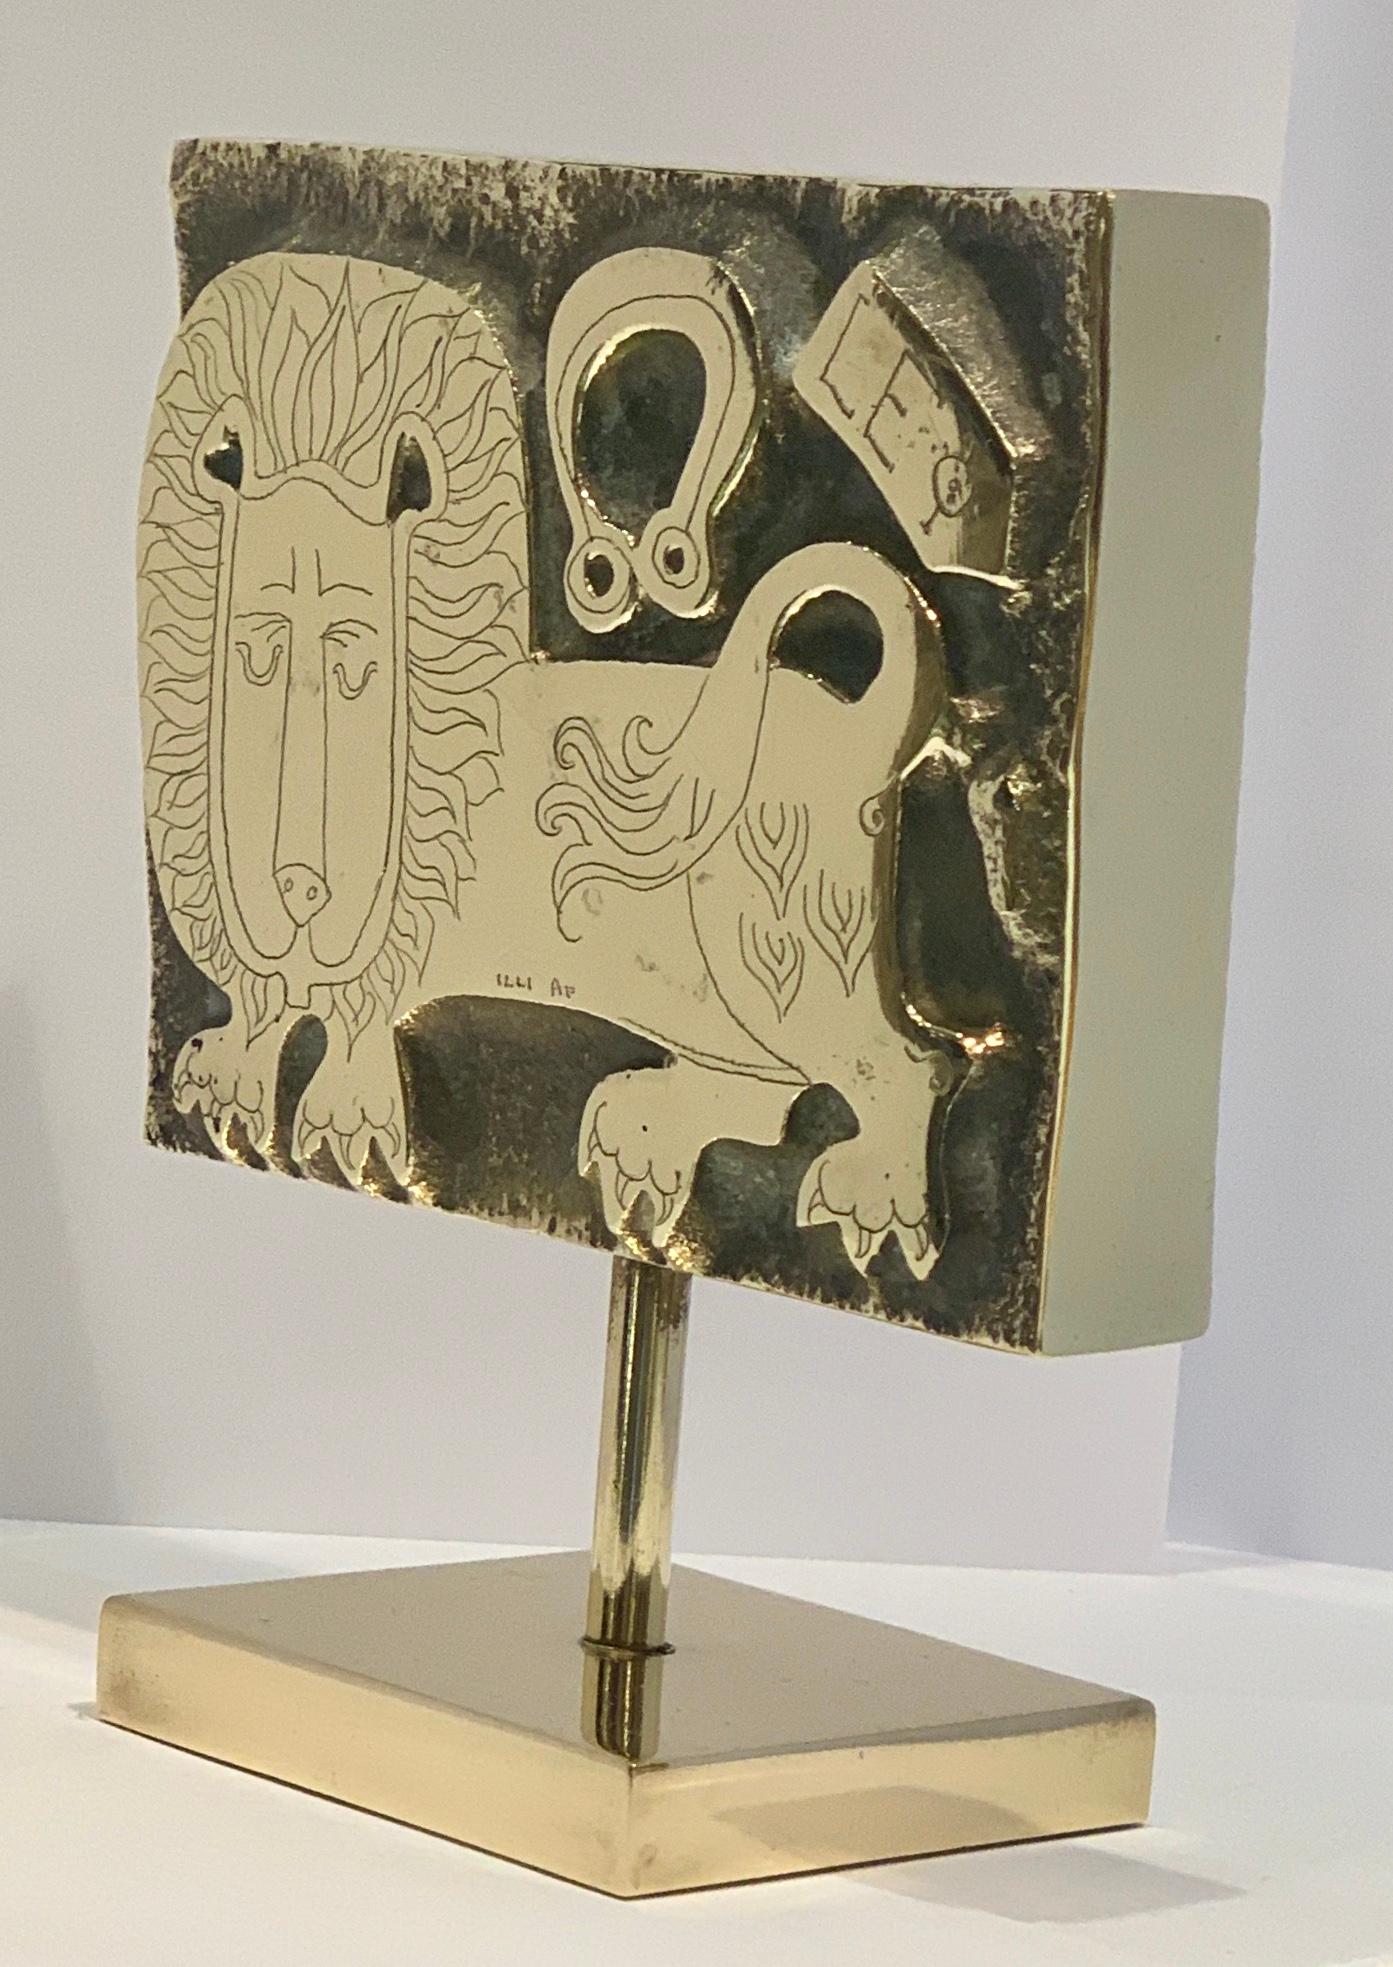 
The perfect gift for the Leo in your life! Richly textural, hand tooled high relief solid heavy brass rectangular block stamp sculpture from the 1960s features a highly polished lion, a good luck horseshoe and the word, “LEO” depicted in the